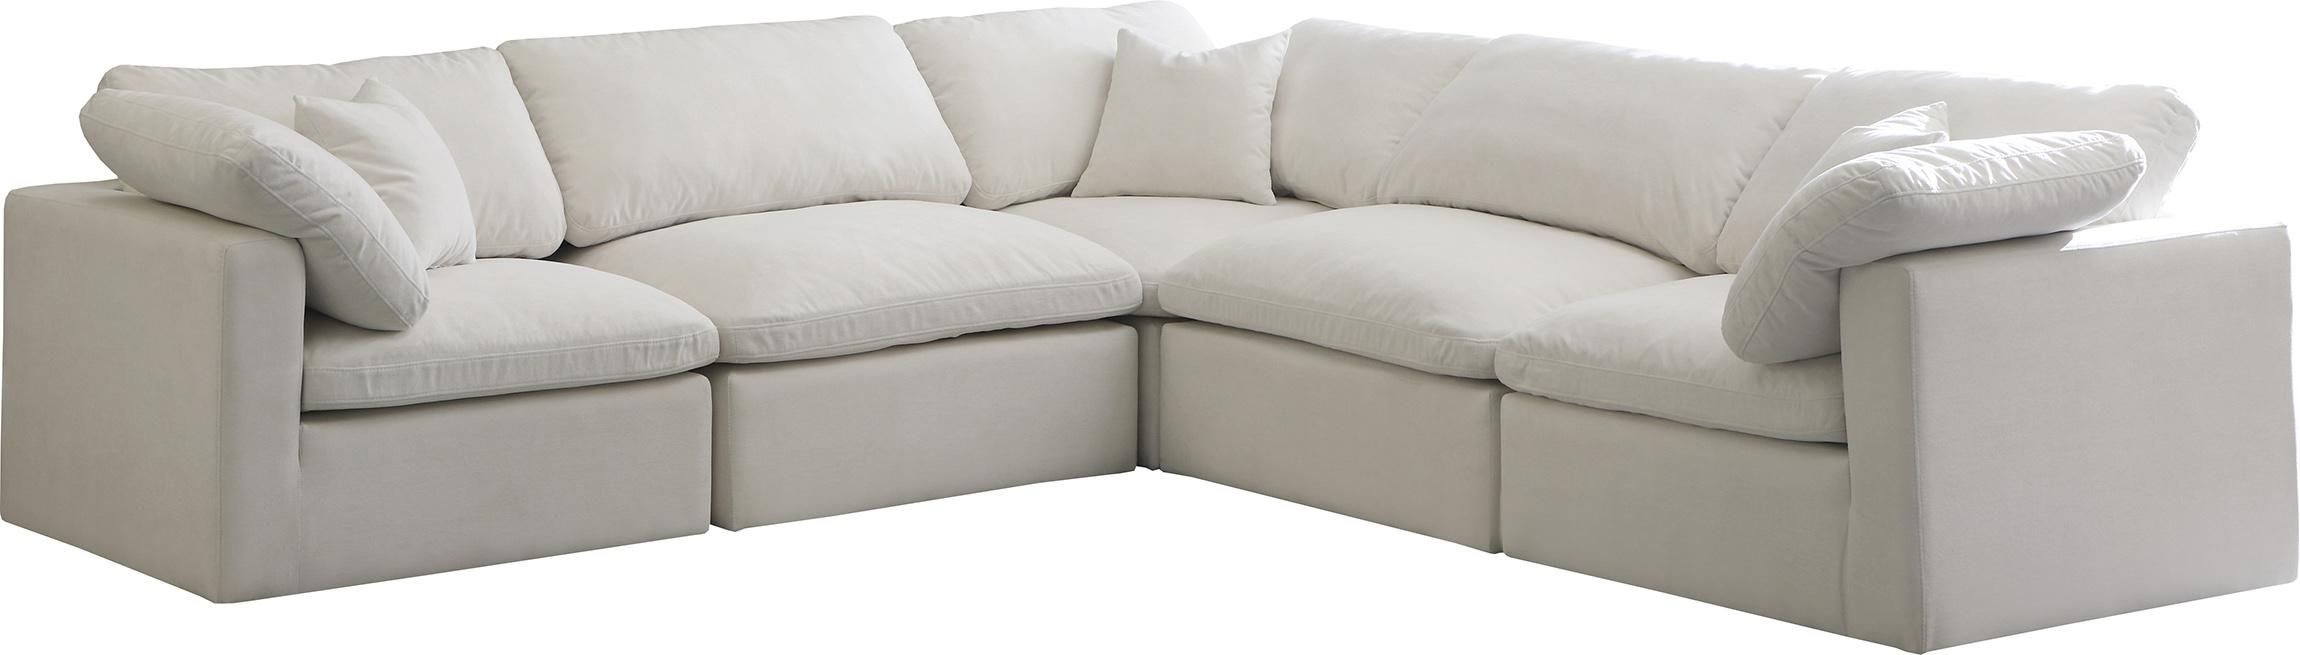 Cream Velvet Cloud 5c Modular Down Filled Reversible Sectional Soflex  Modern – Buy Online On Ny Furniture Outlet With Regard To Cream Velvet Modular Sectionals (View 15 of 15)